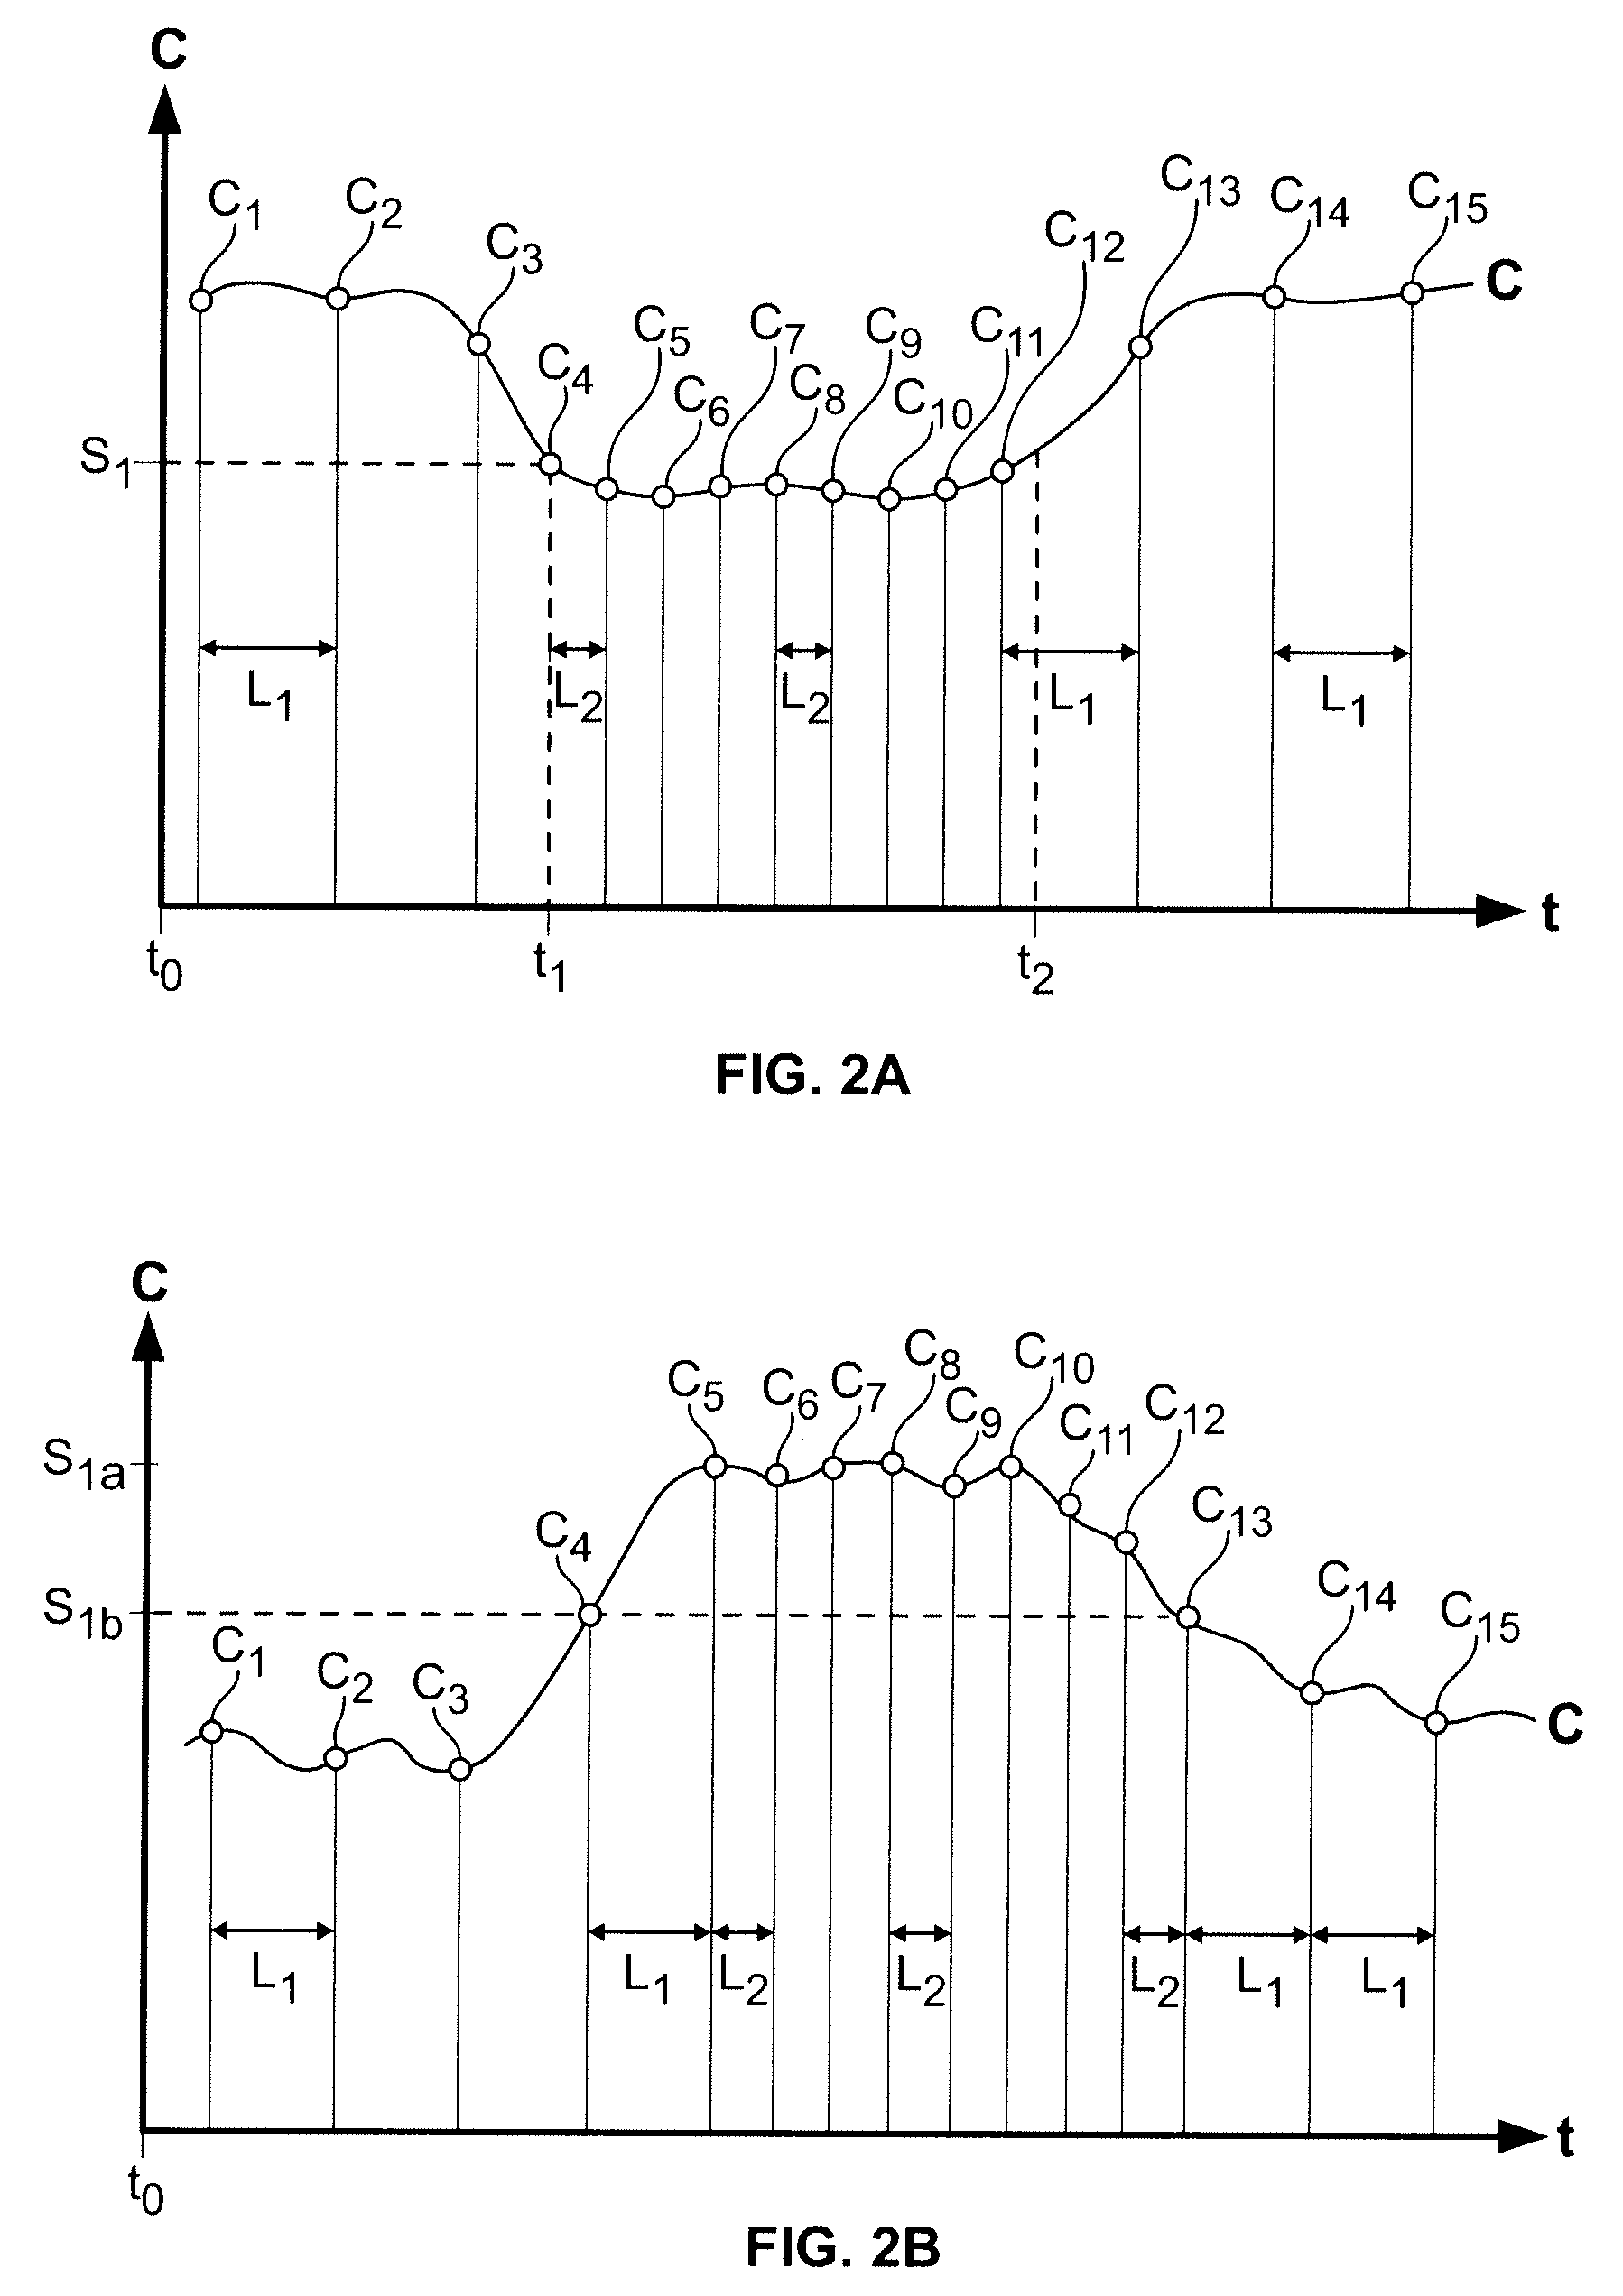 Utility monitoring system with variable logging